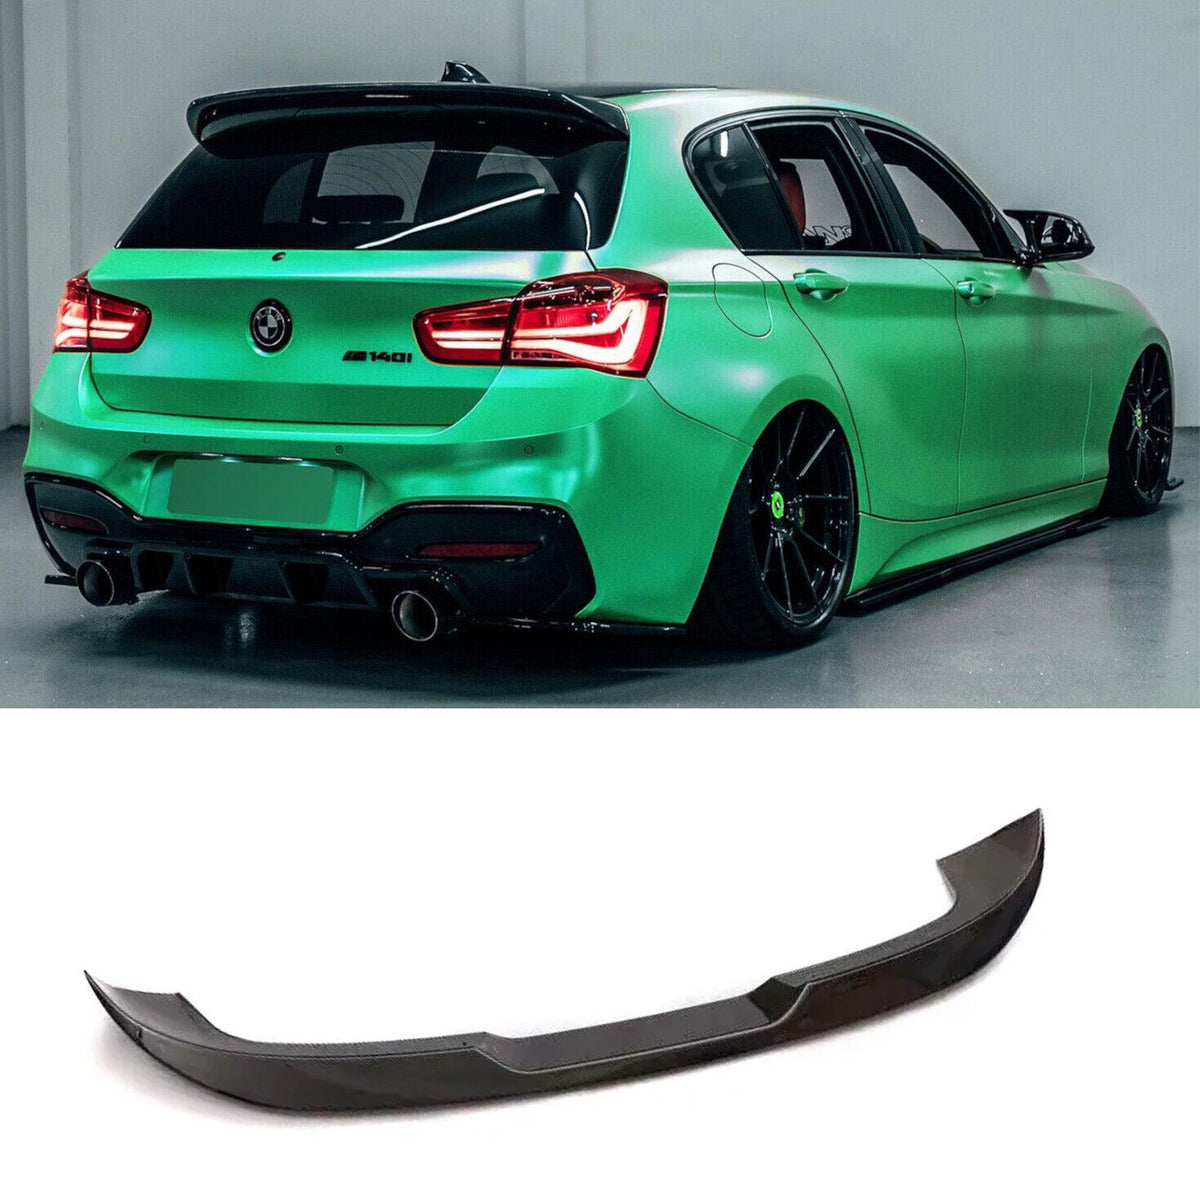 BMW F20 F21 1 Series M Performance Style Gloss Black Roof Spoiler 11-1 –  Carbon Factory